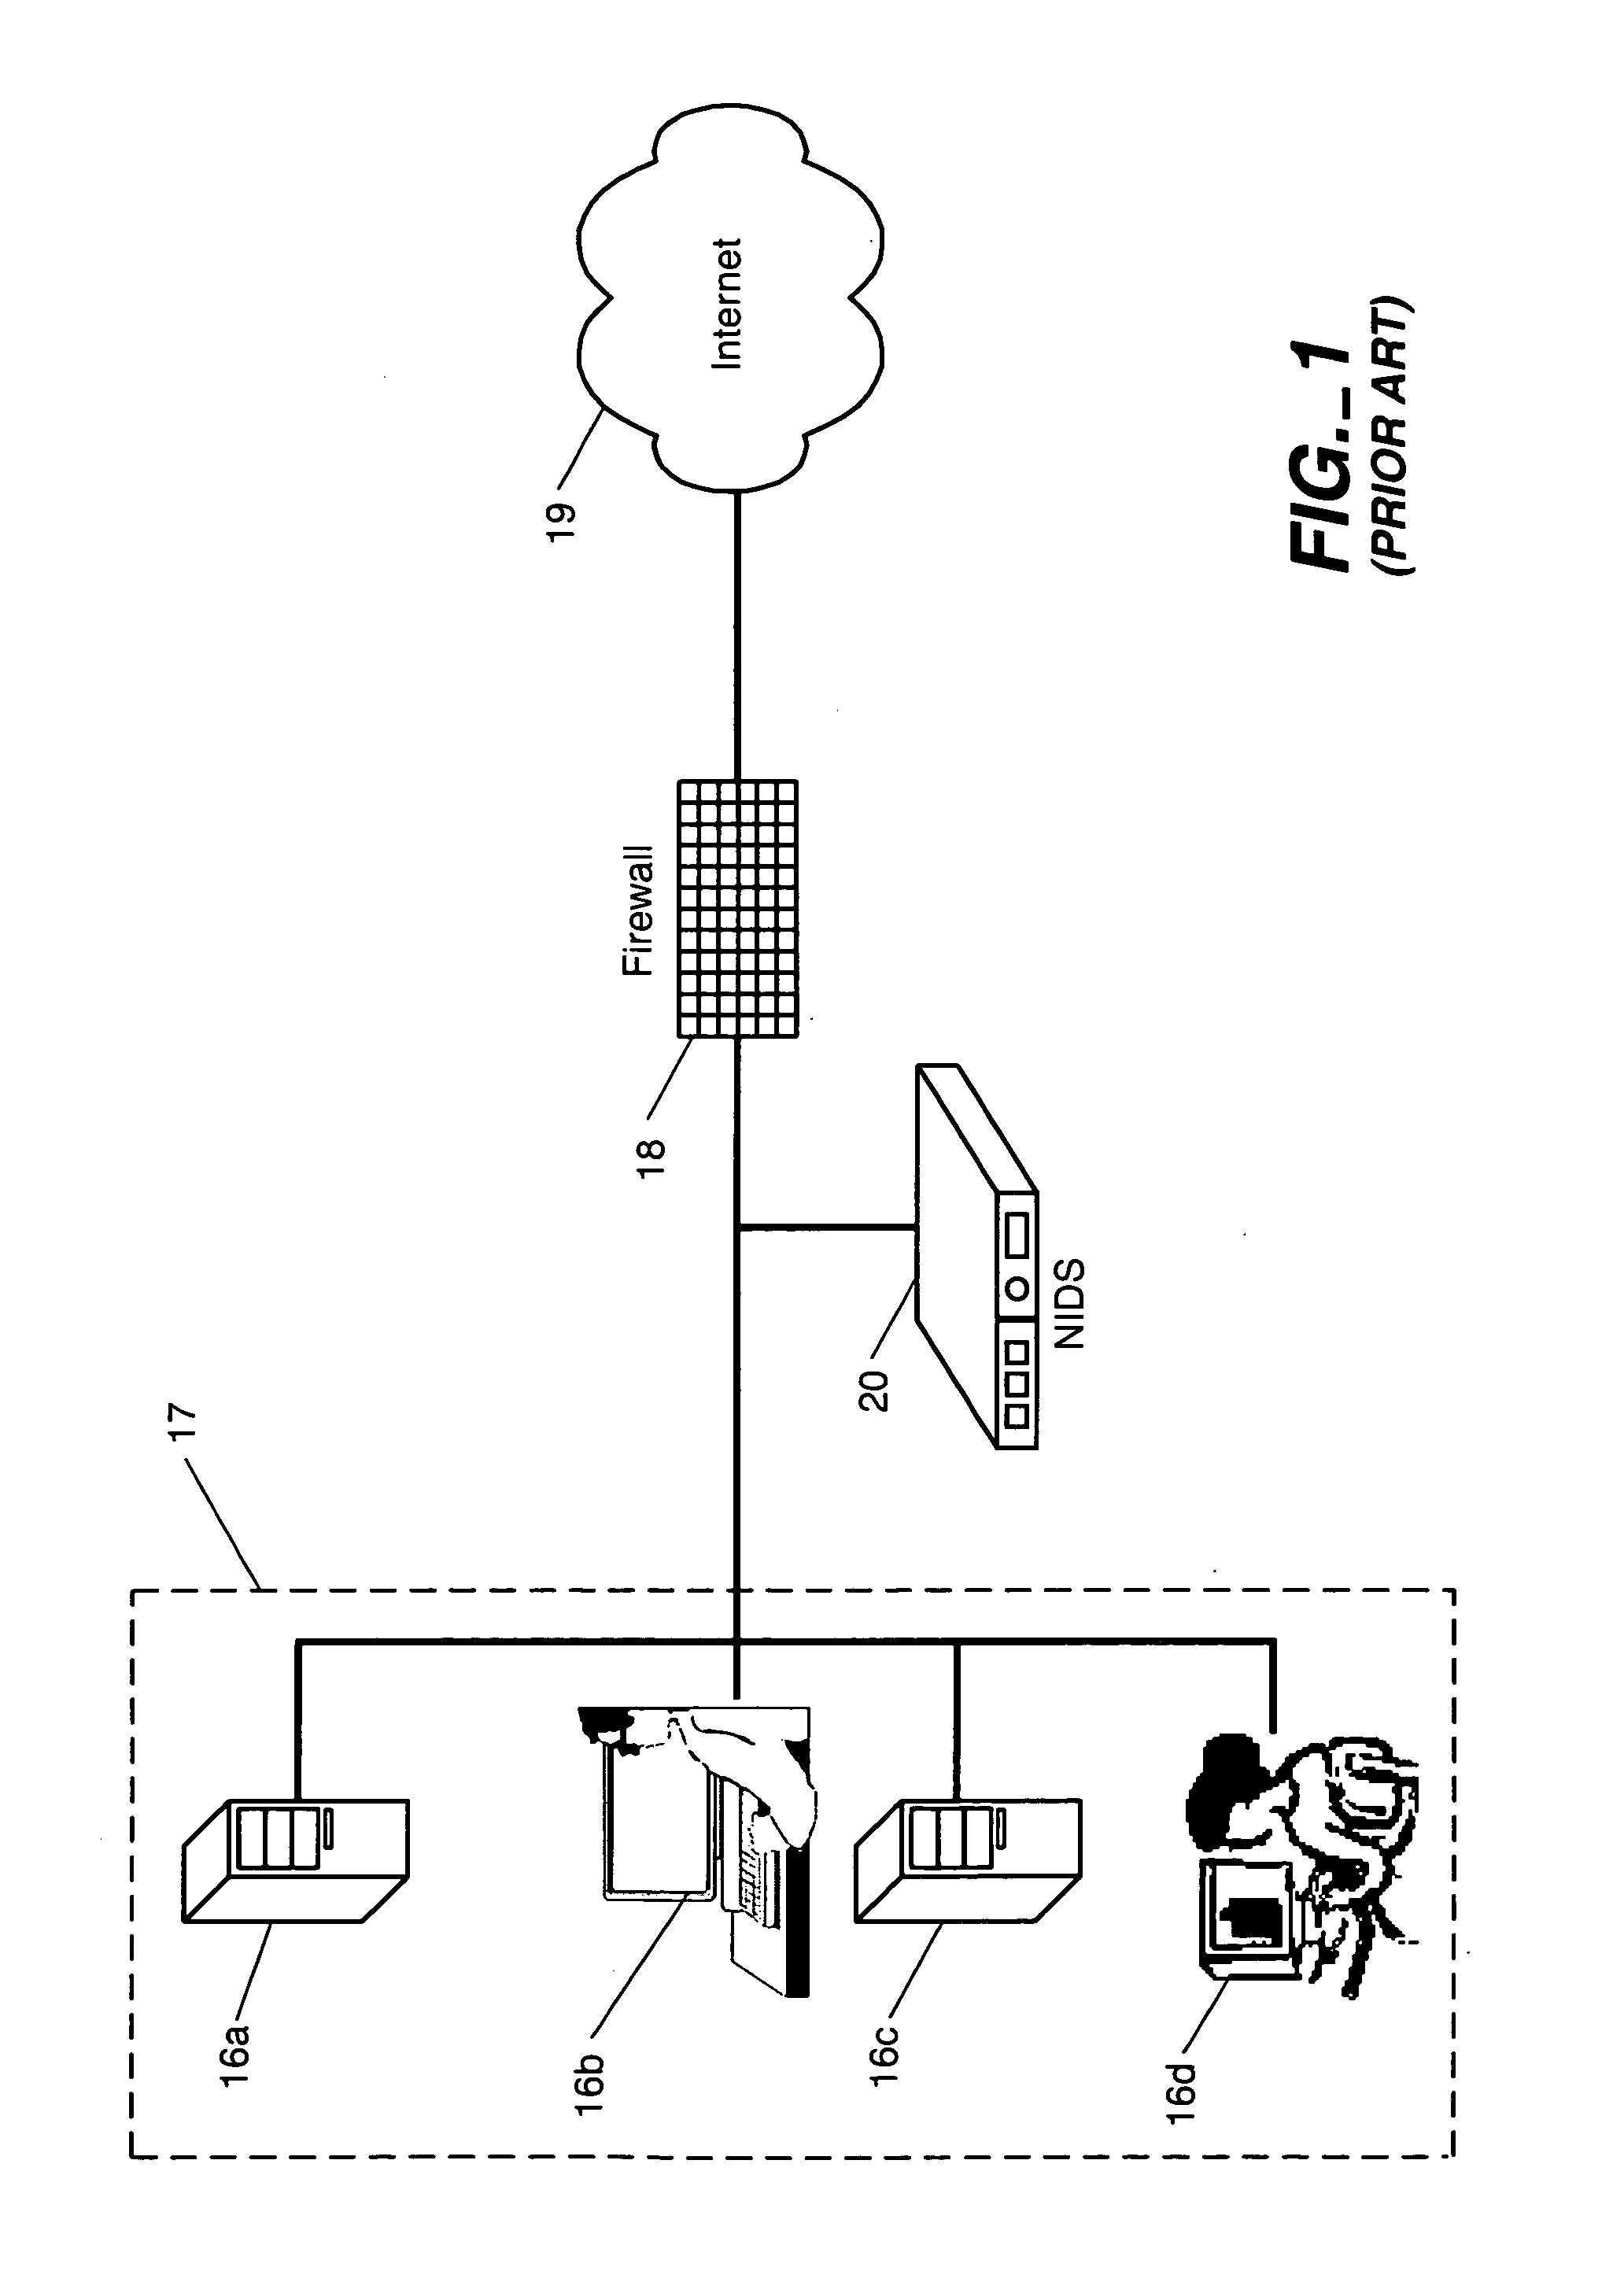 Multi-method gateway-based network security systems and methods